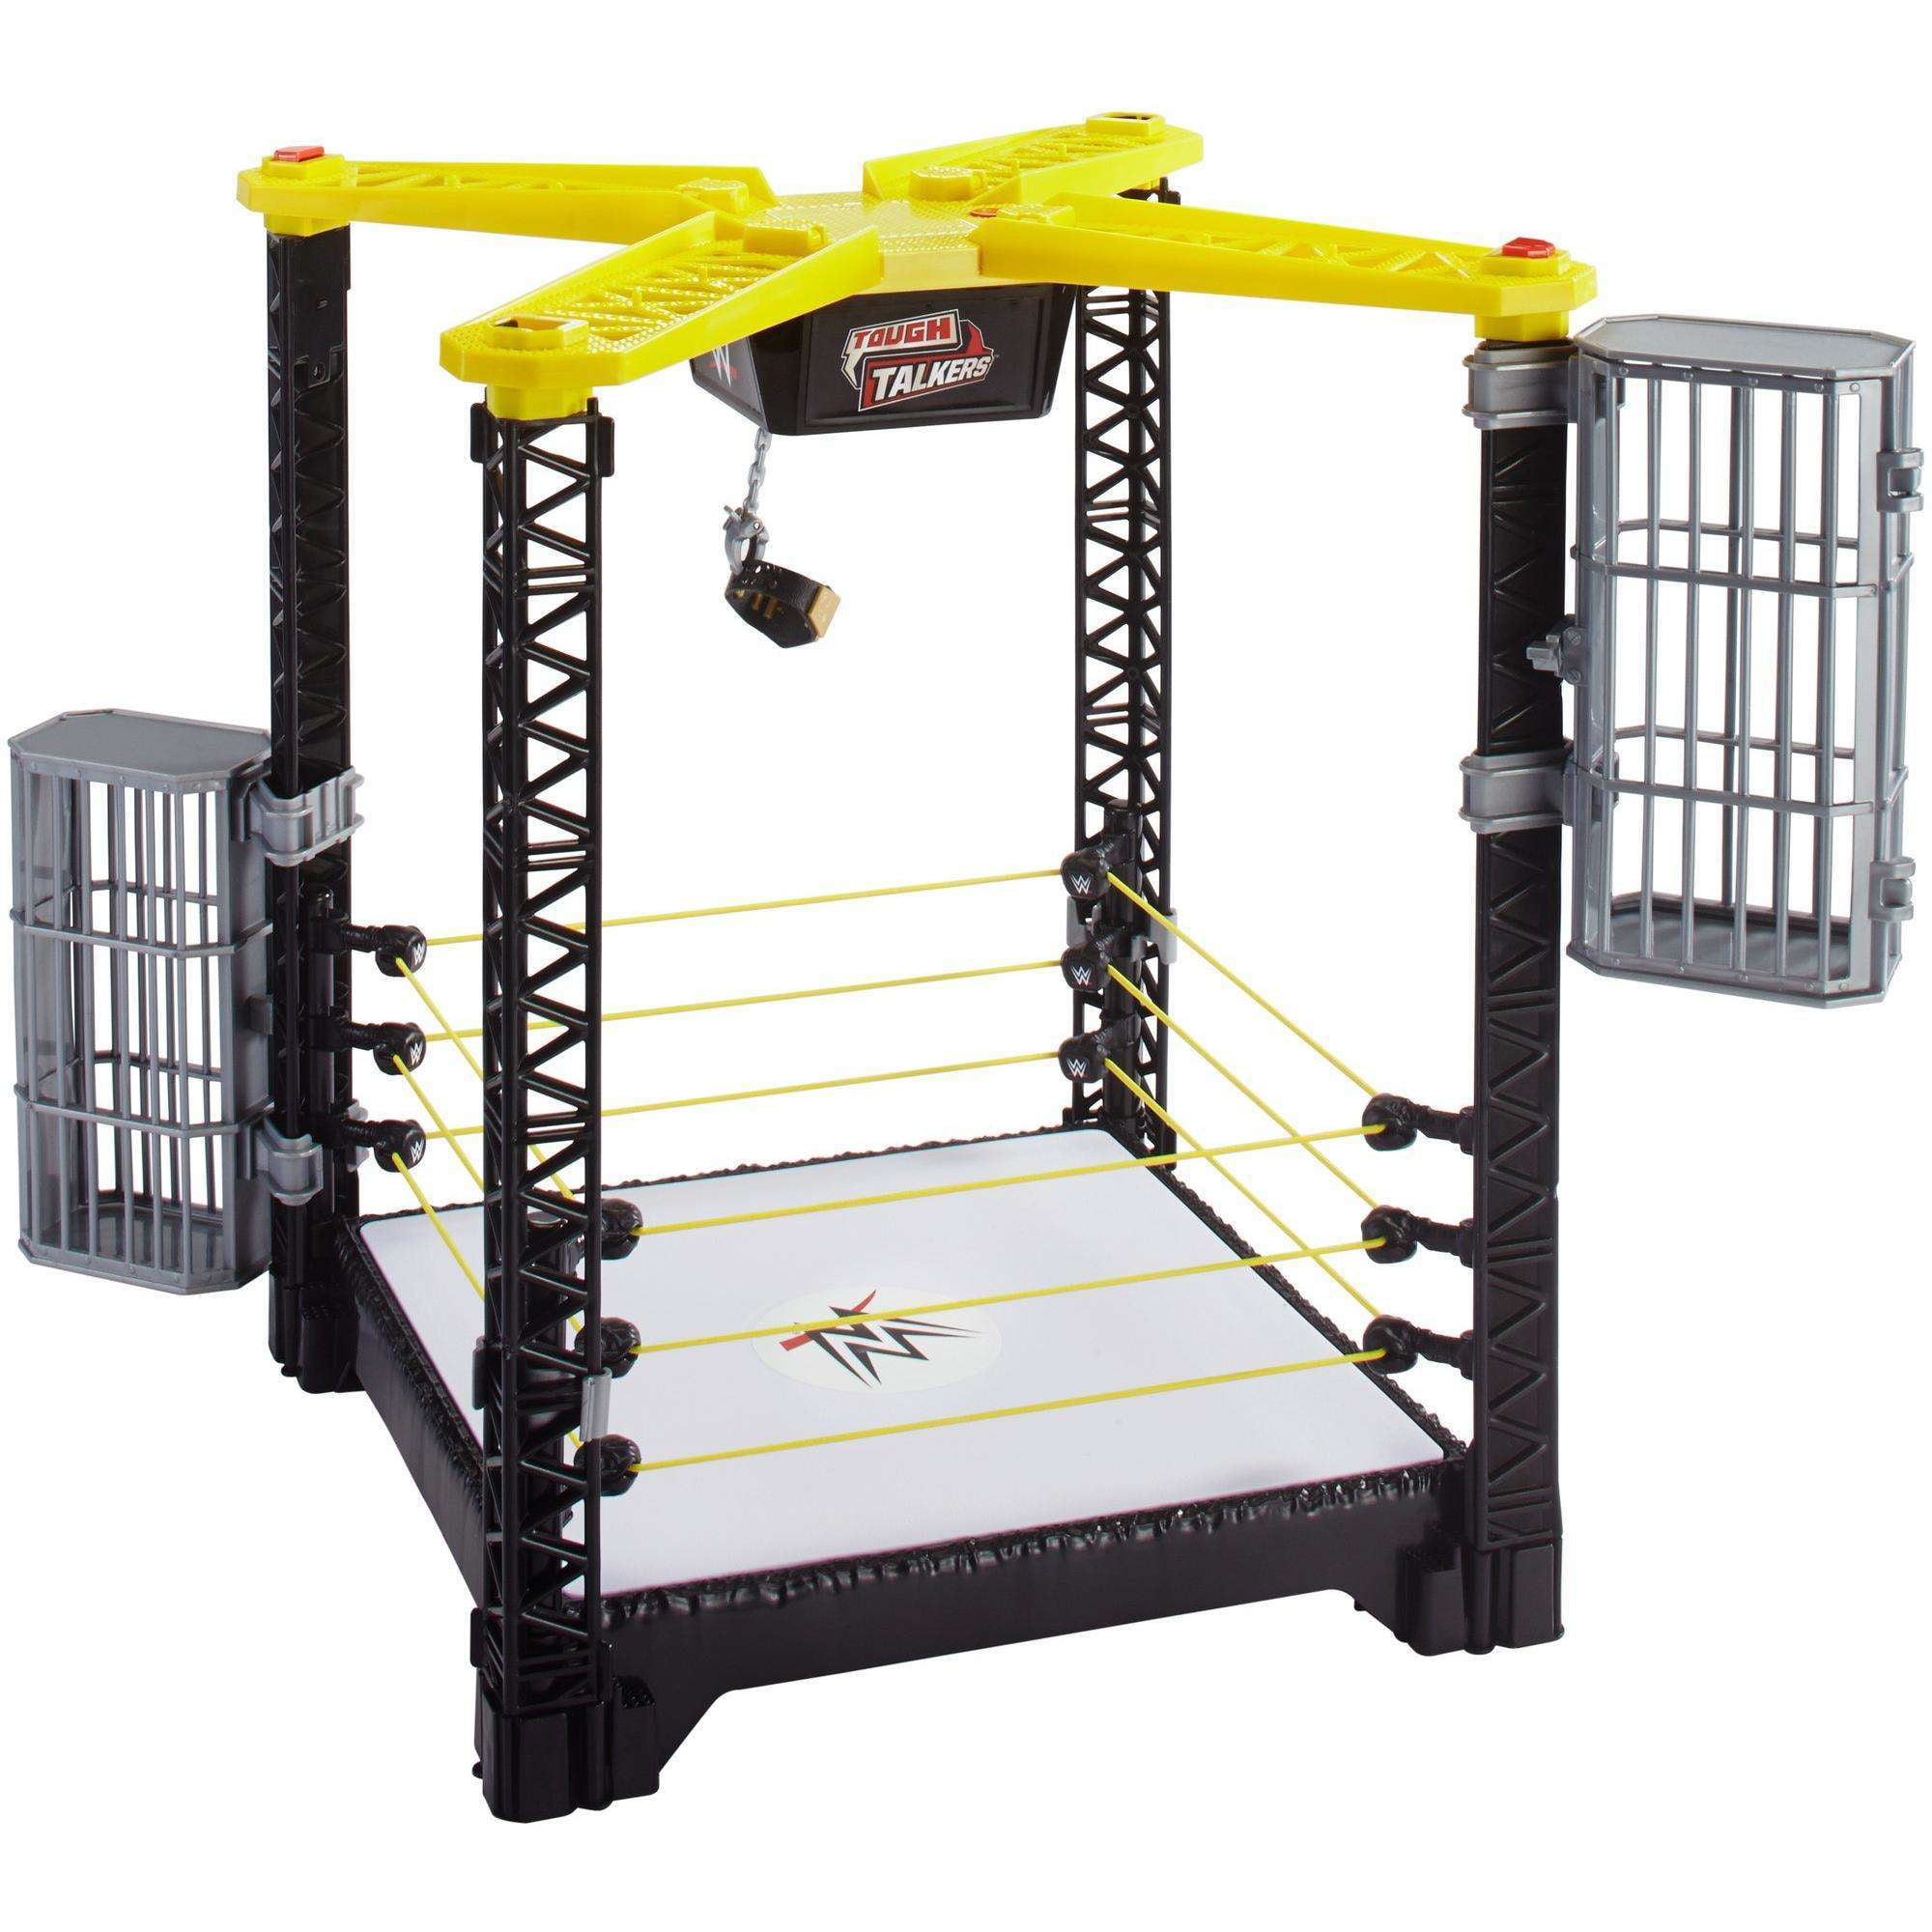 wwe tough talkers wrestling ring